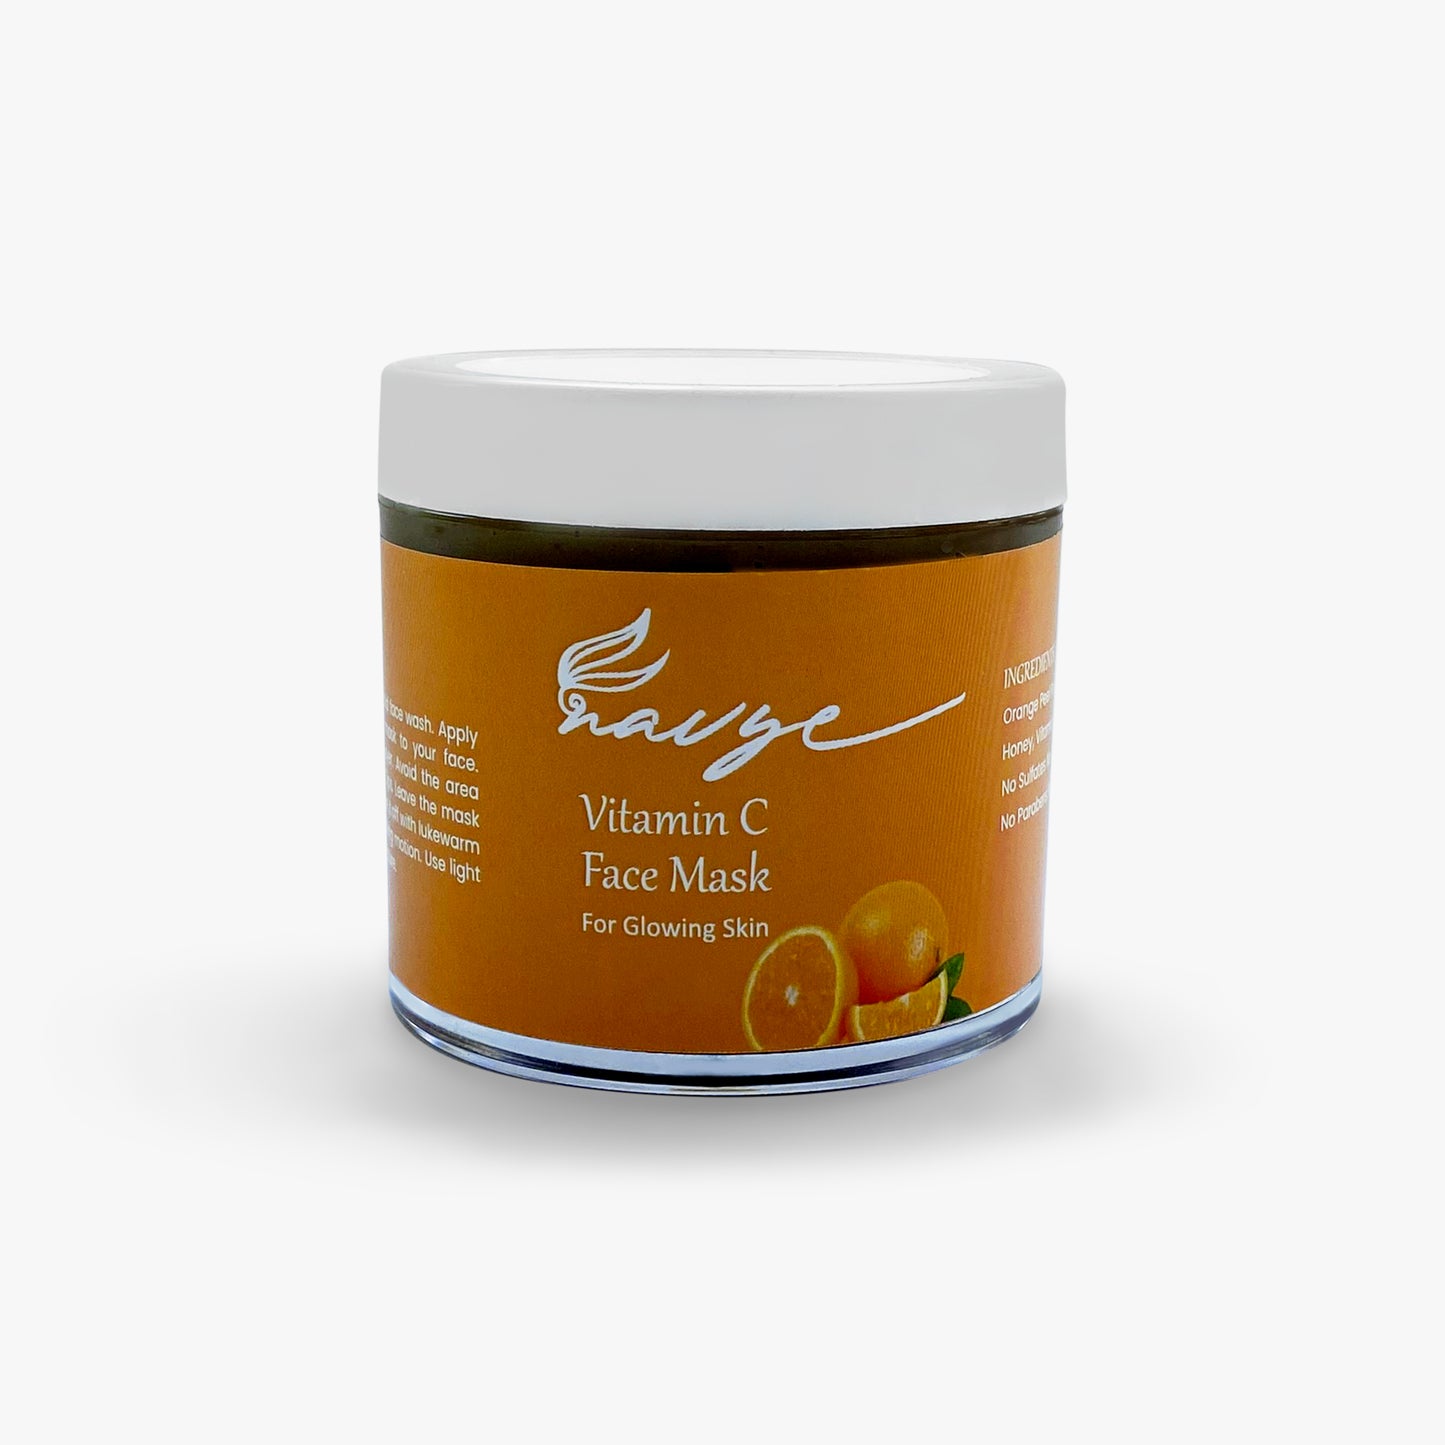 Vitamin C face mask ( for glowing skin ) - 100ml